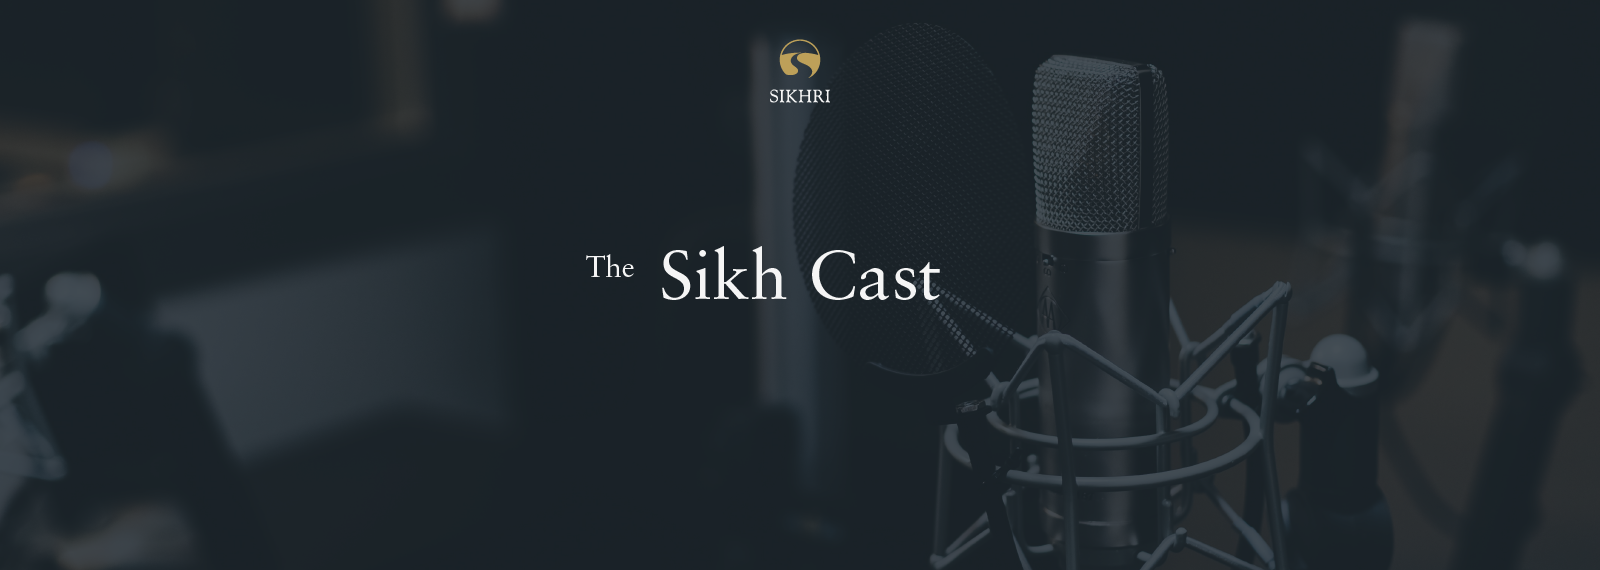 The Sikh Cast